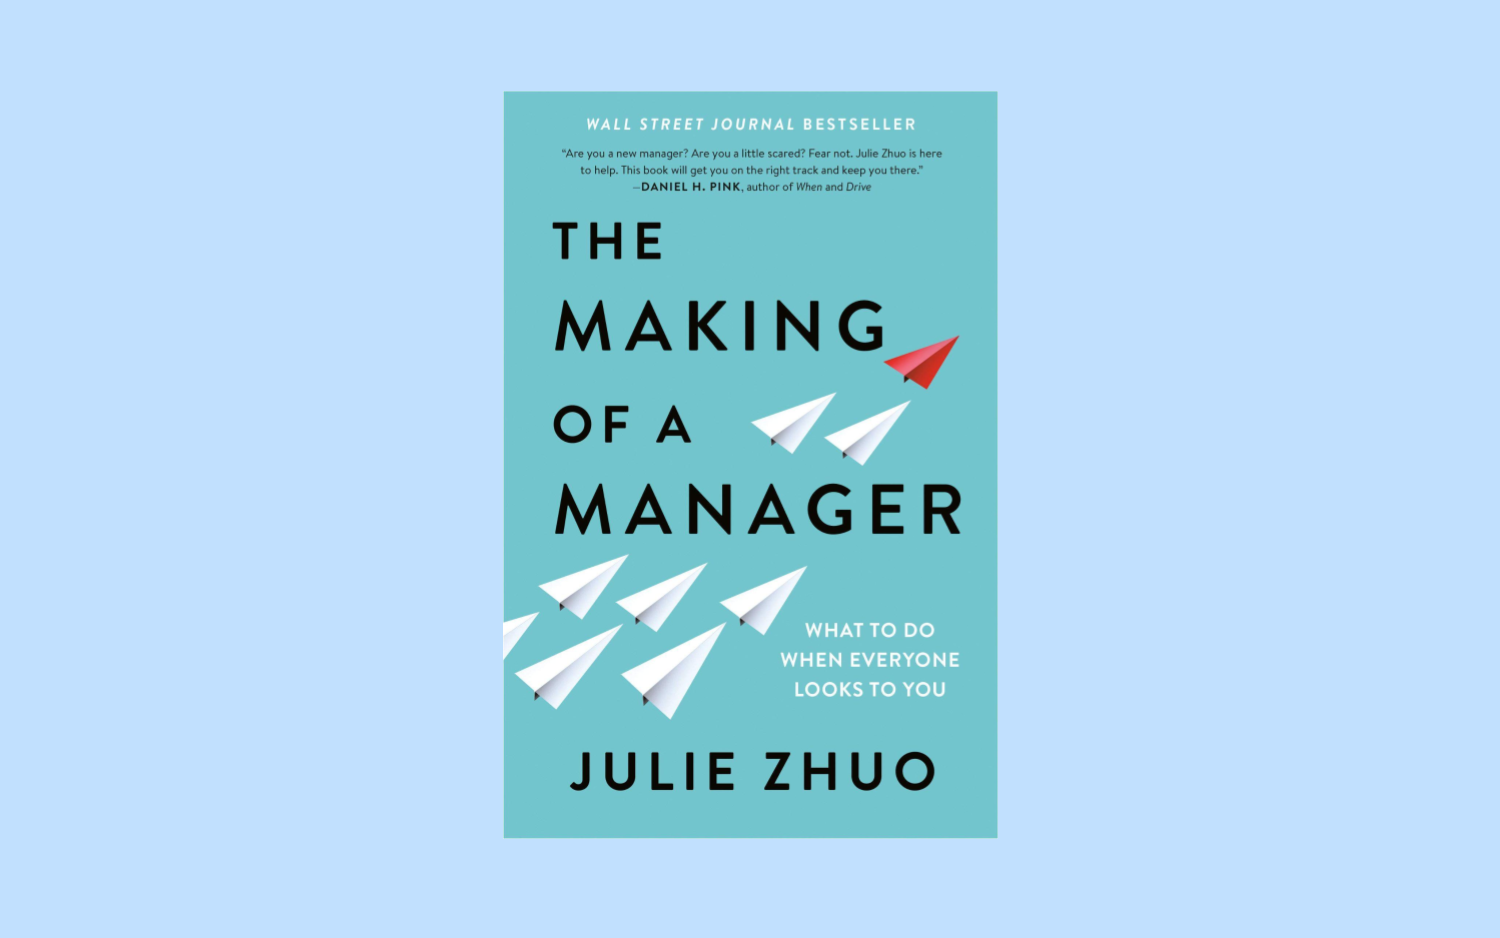 20-books-senior-product-managers-are-reading_6